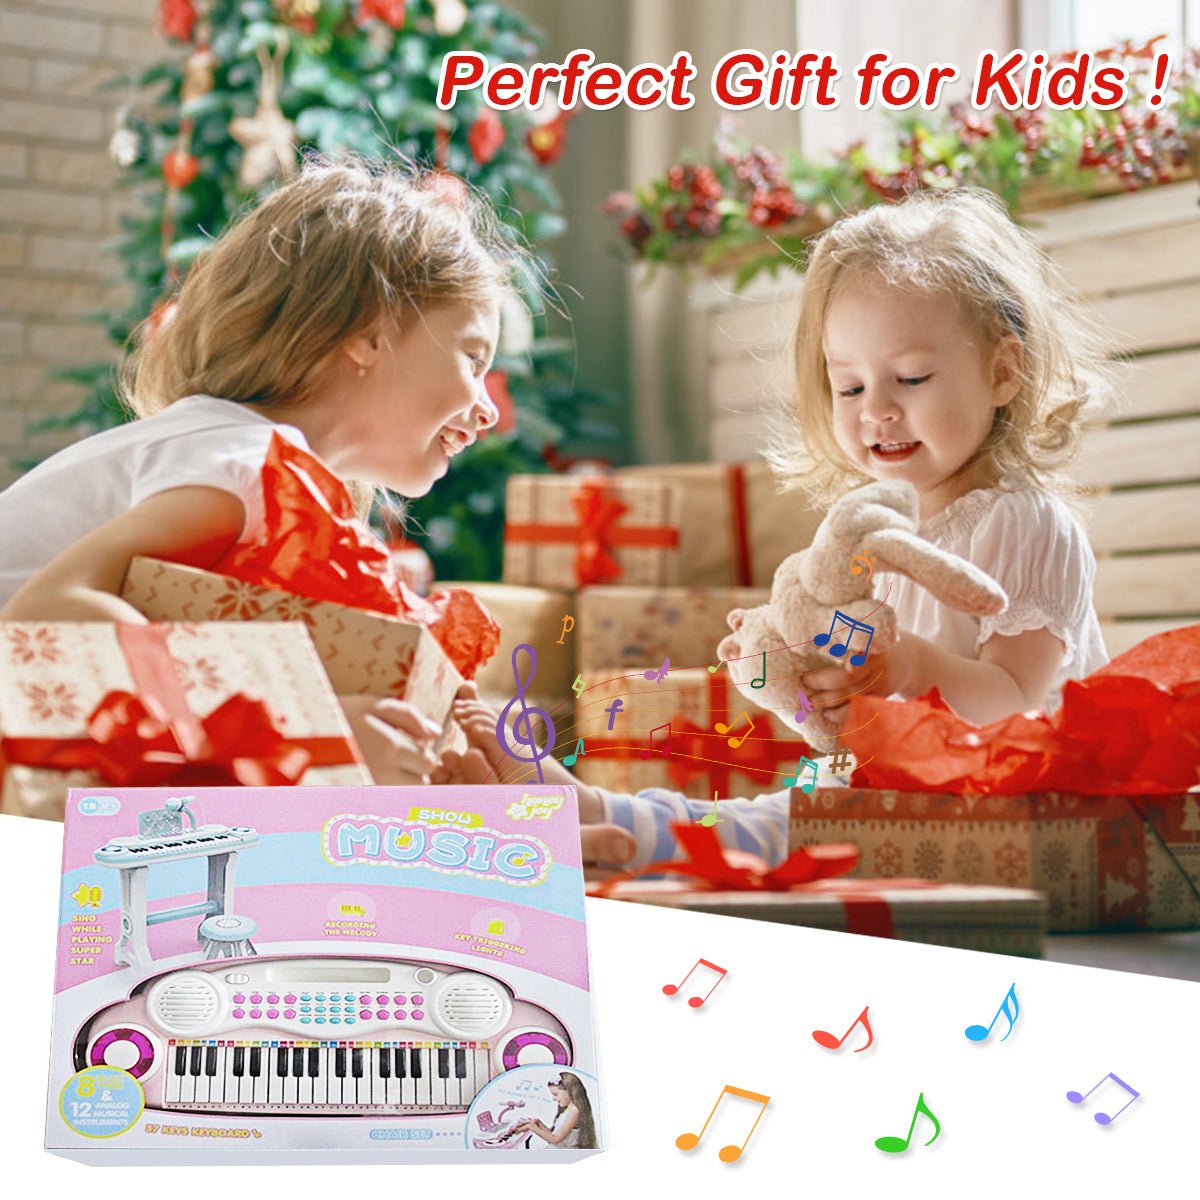 Melodic Magic: 37-Key Electronic Kids Piano with Stool & Microphone